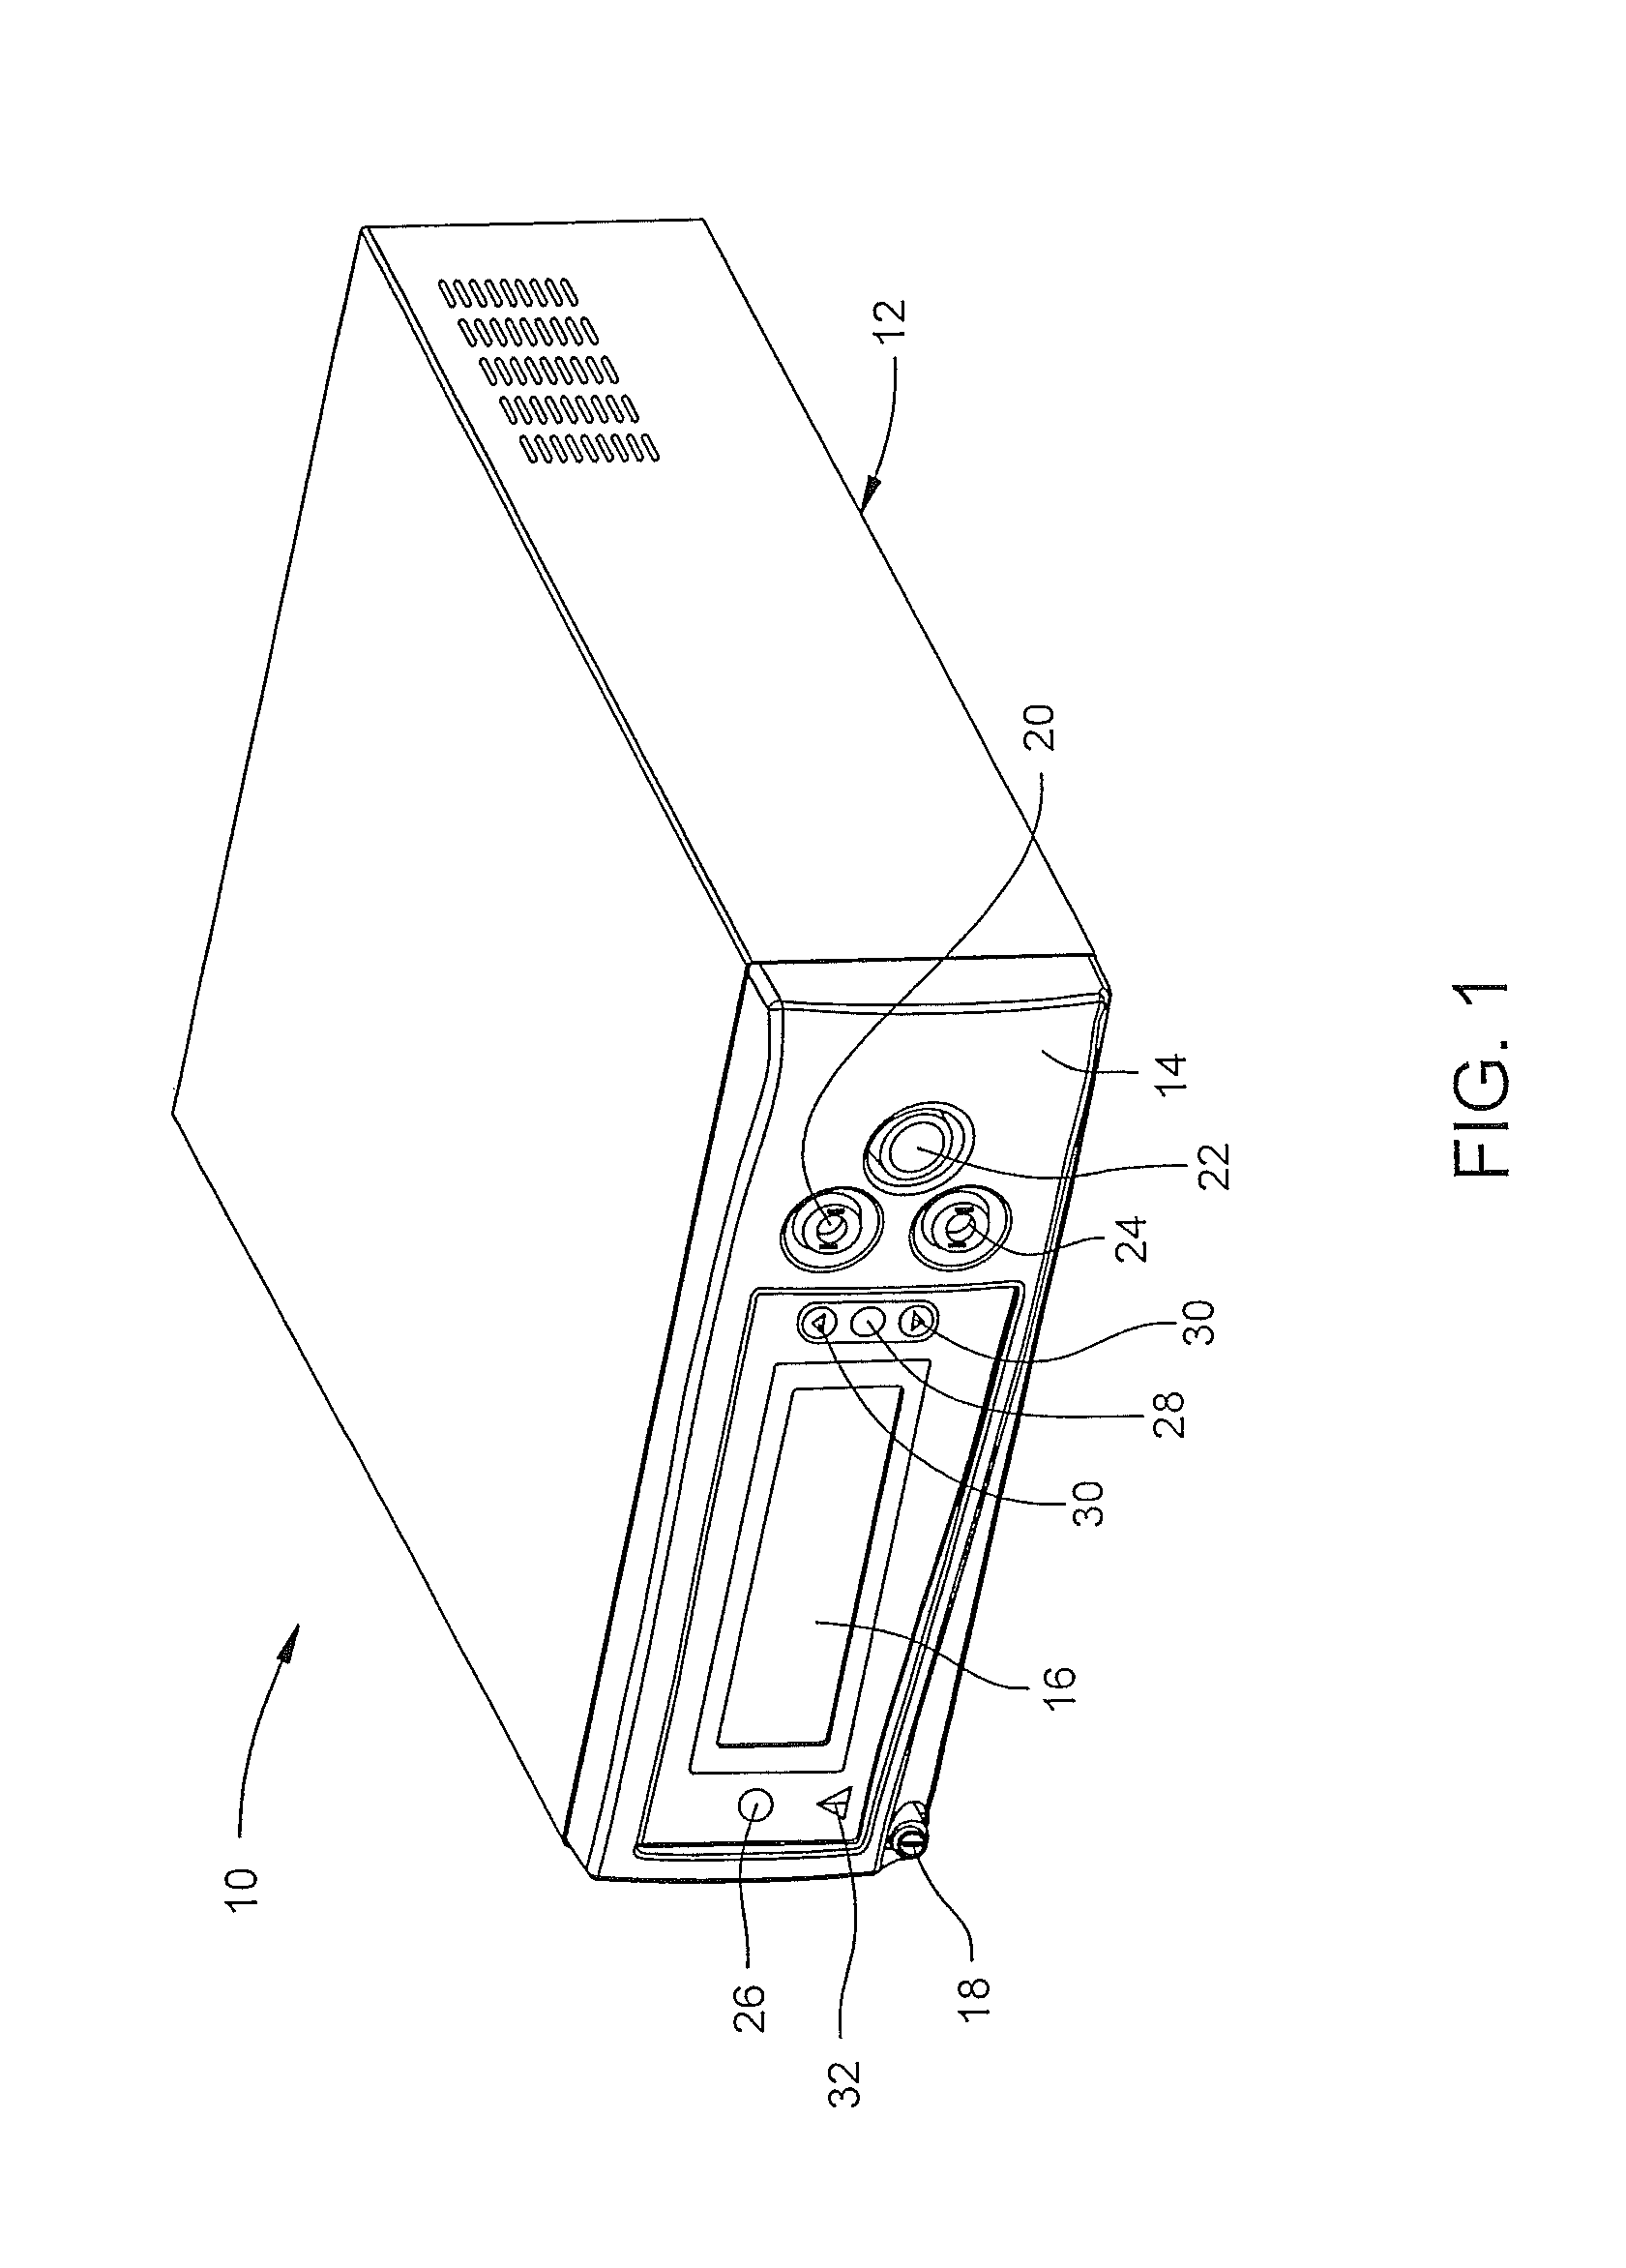 RF energy console including method for vessel sealing